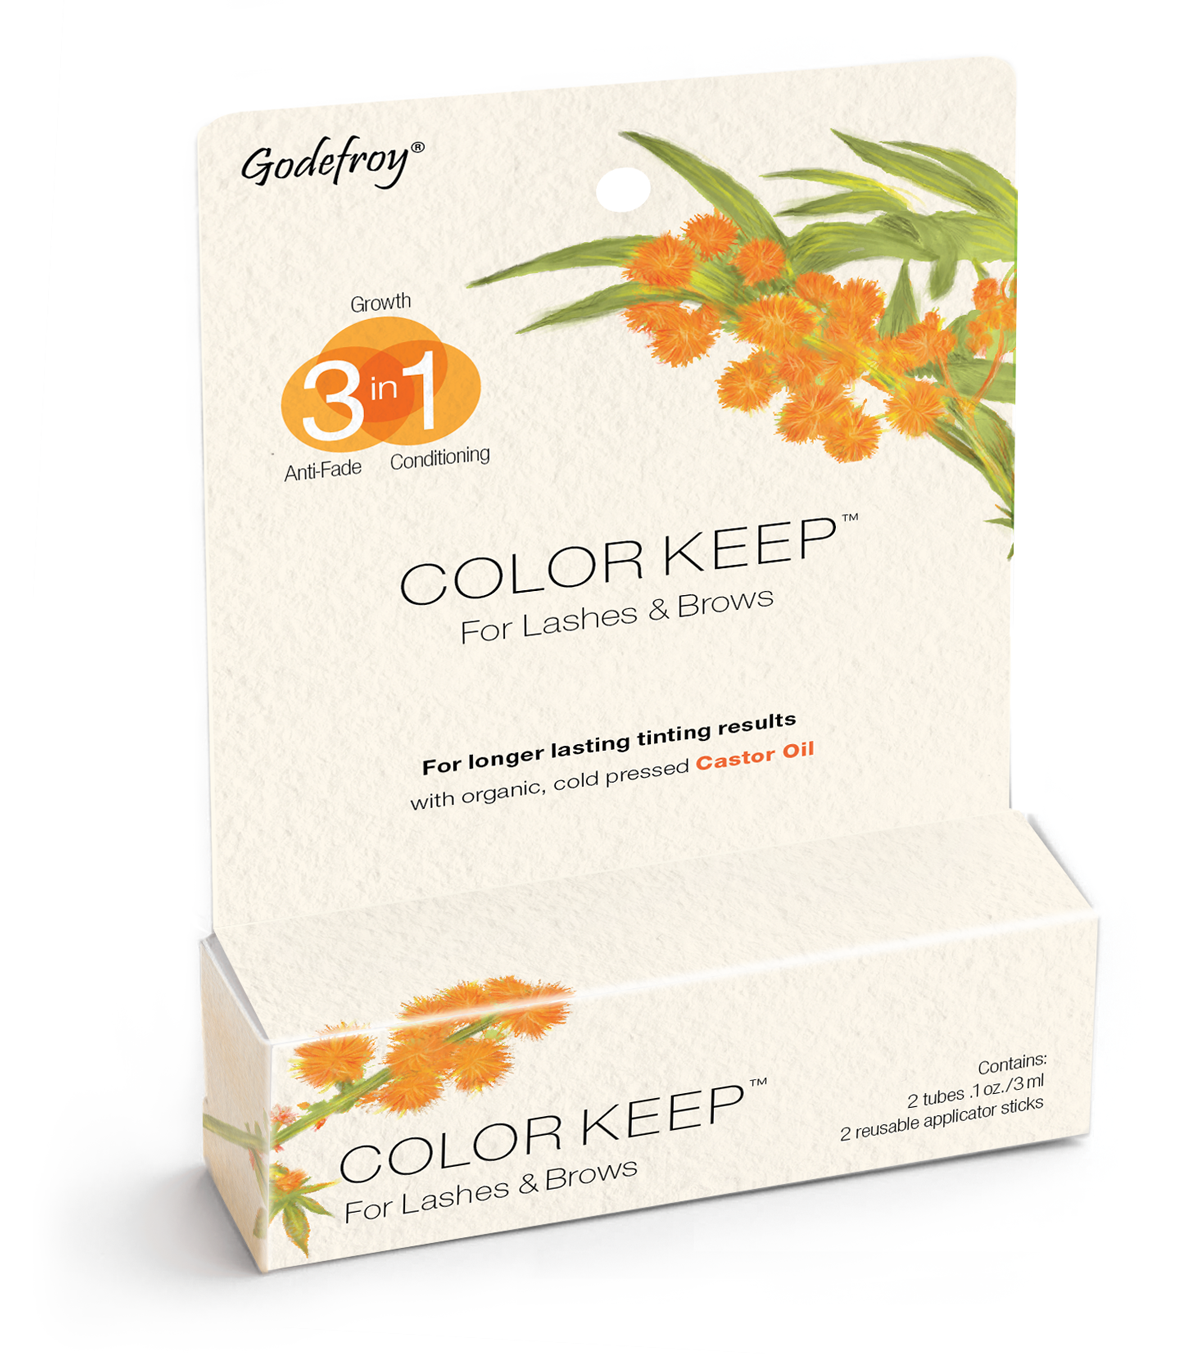 color keep is formulated with all natural ingredients such as lanolin oil, geranium oil, and retinol